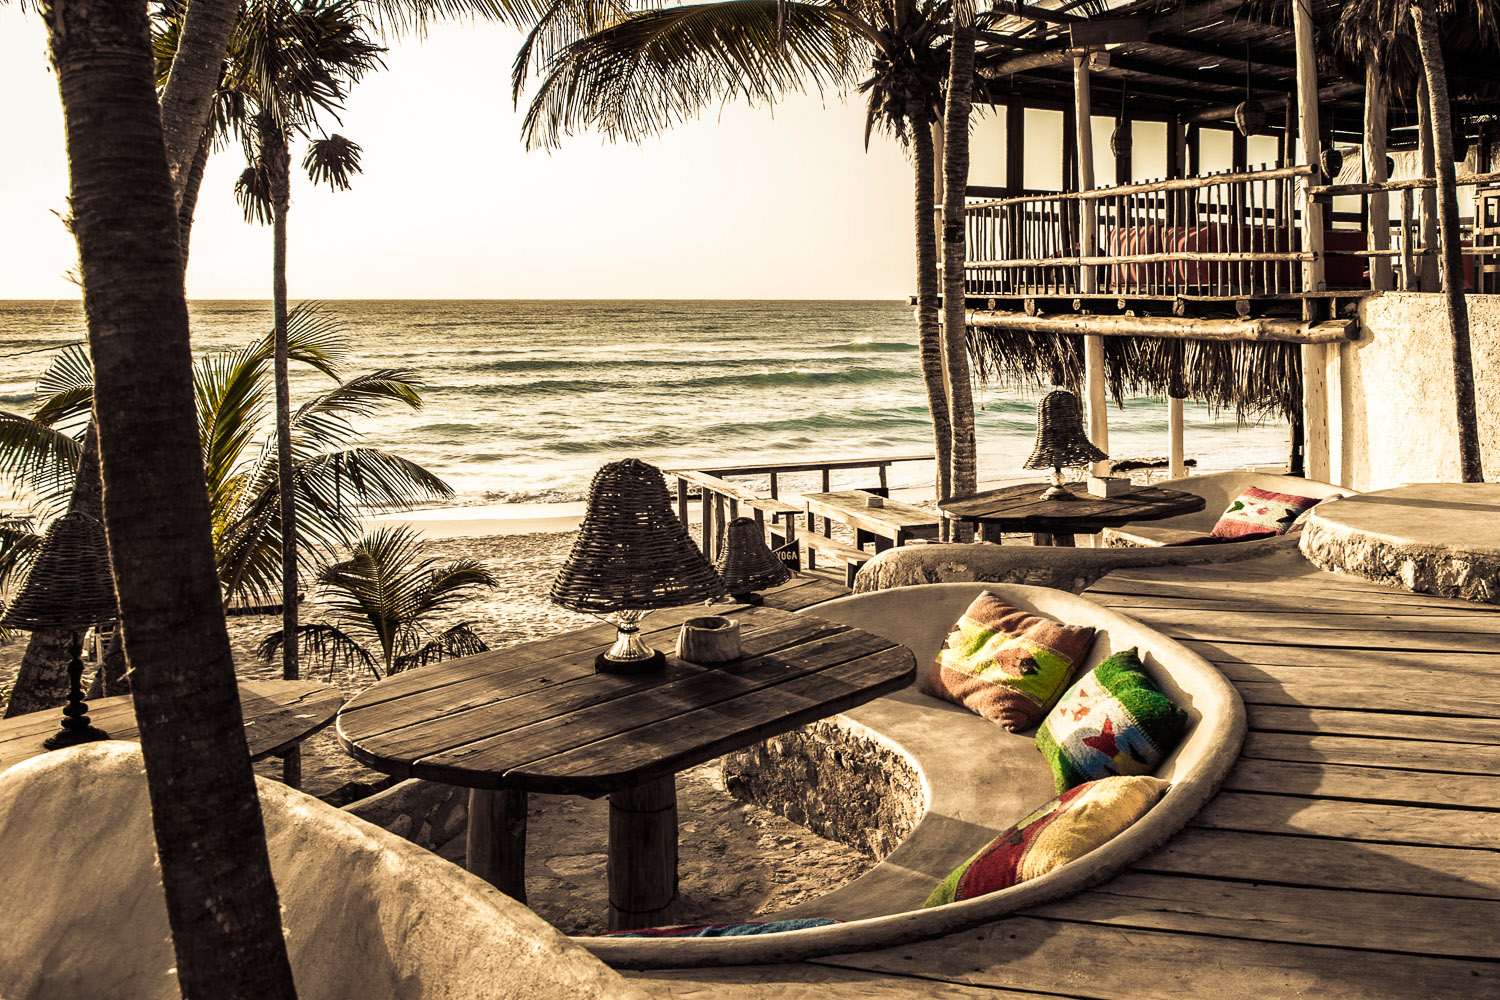 Beach bar and lounge at Papya Playa Project in Tulum, Mexico.